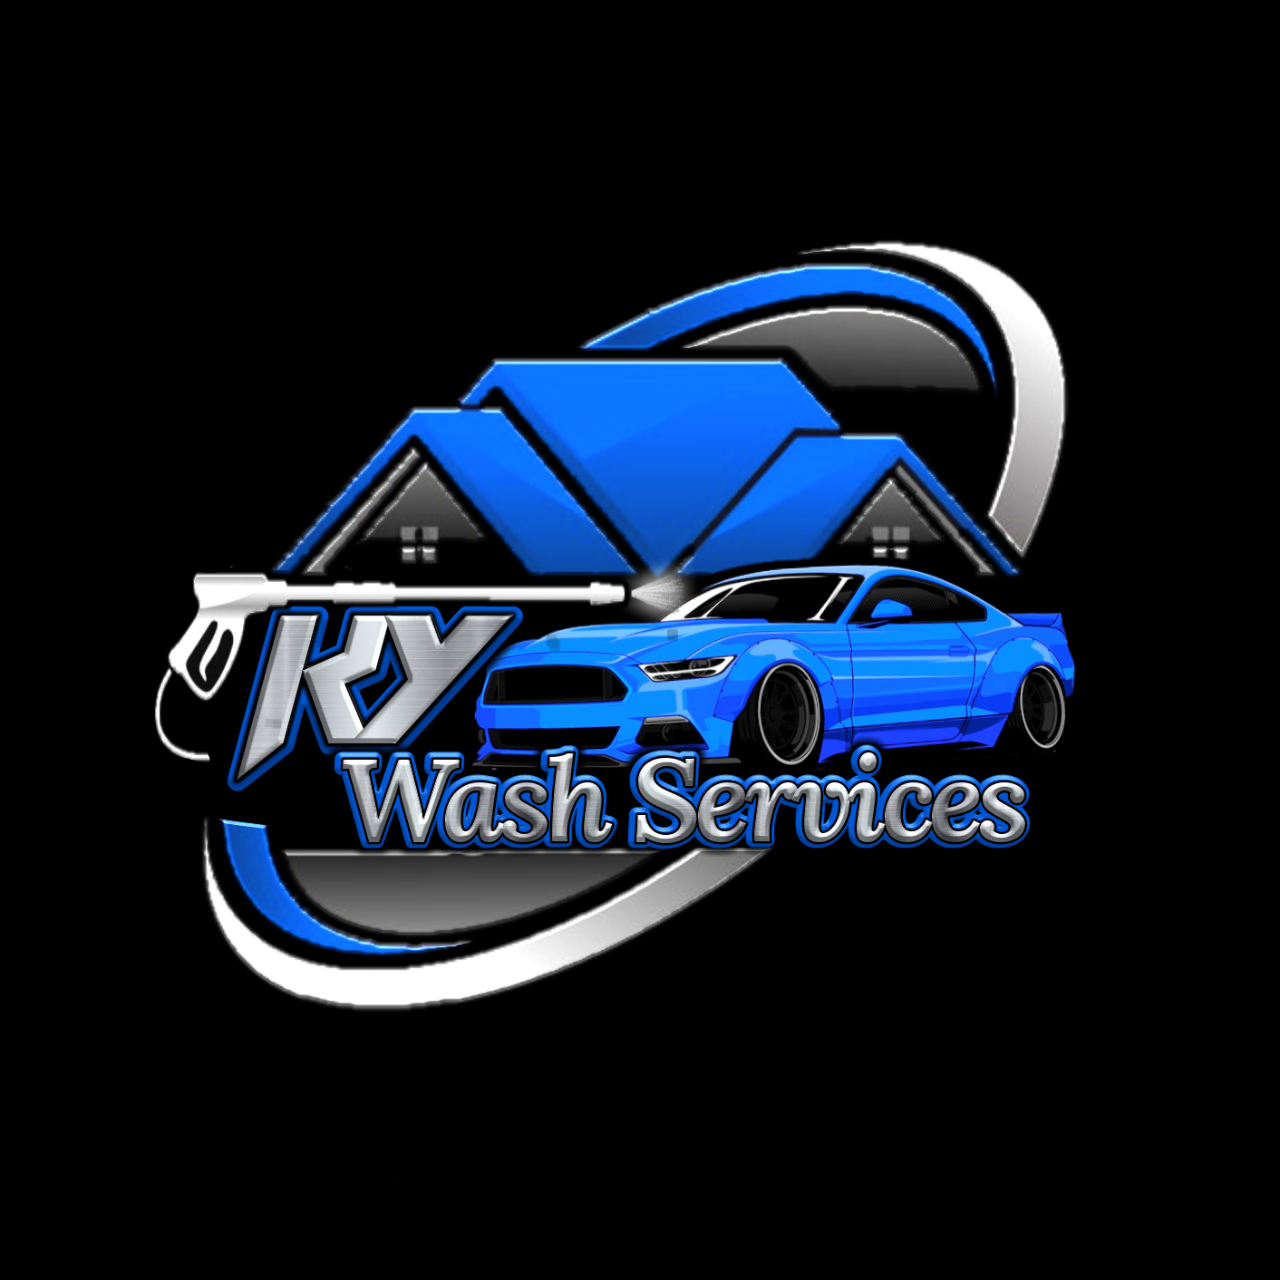 Ky wash services